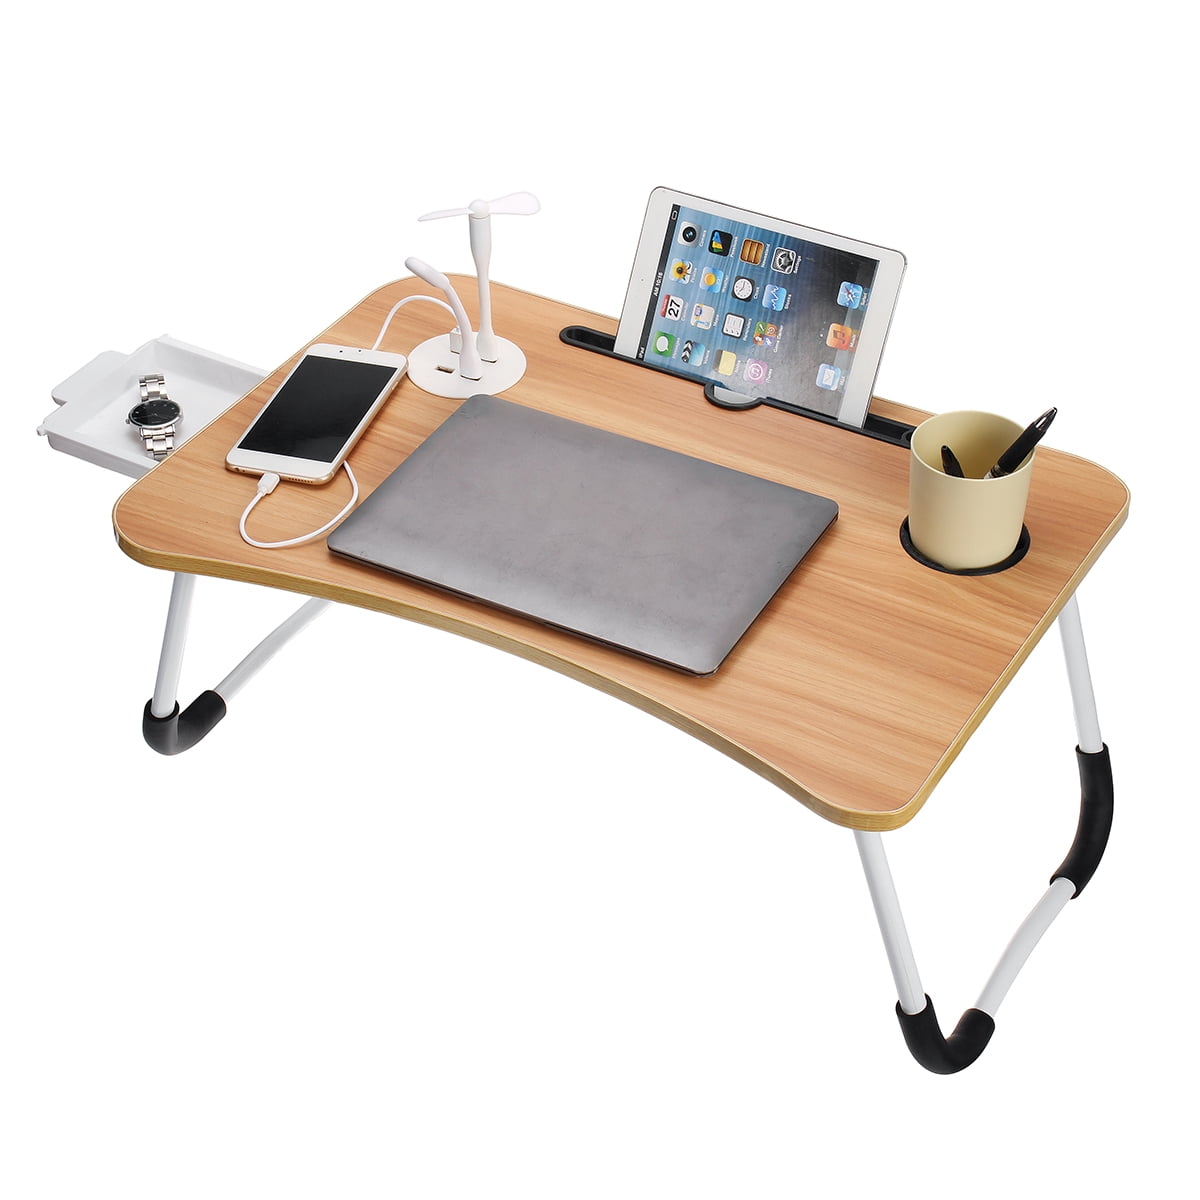 4 colors Wooden with USB Built in Fan Laptop/Notebook Adjustable Table Stand 